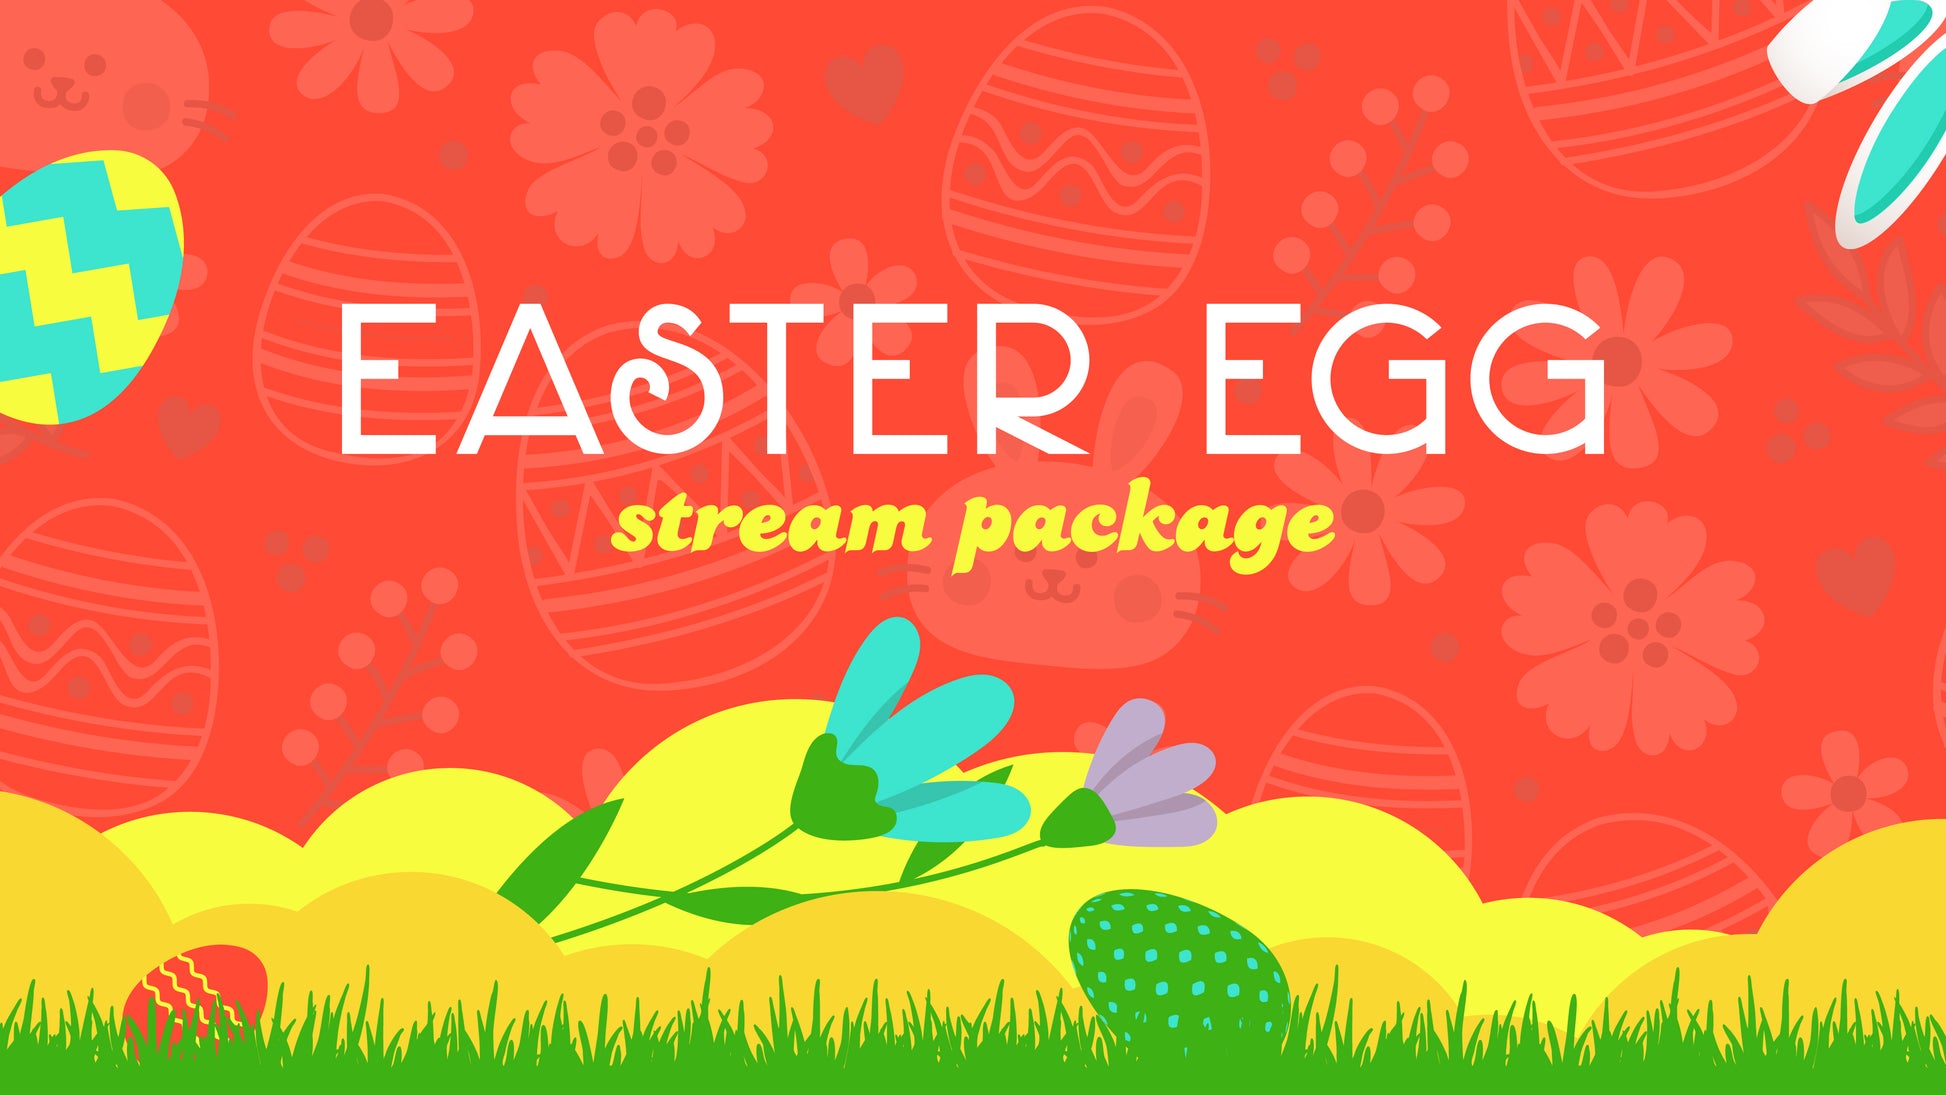 Stream overlay package easter egg orange and yellow thumbnail stream designz